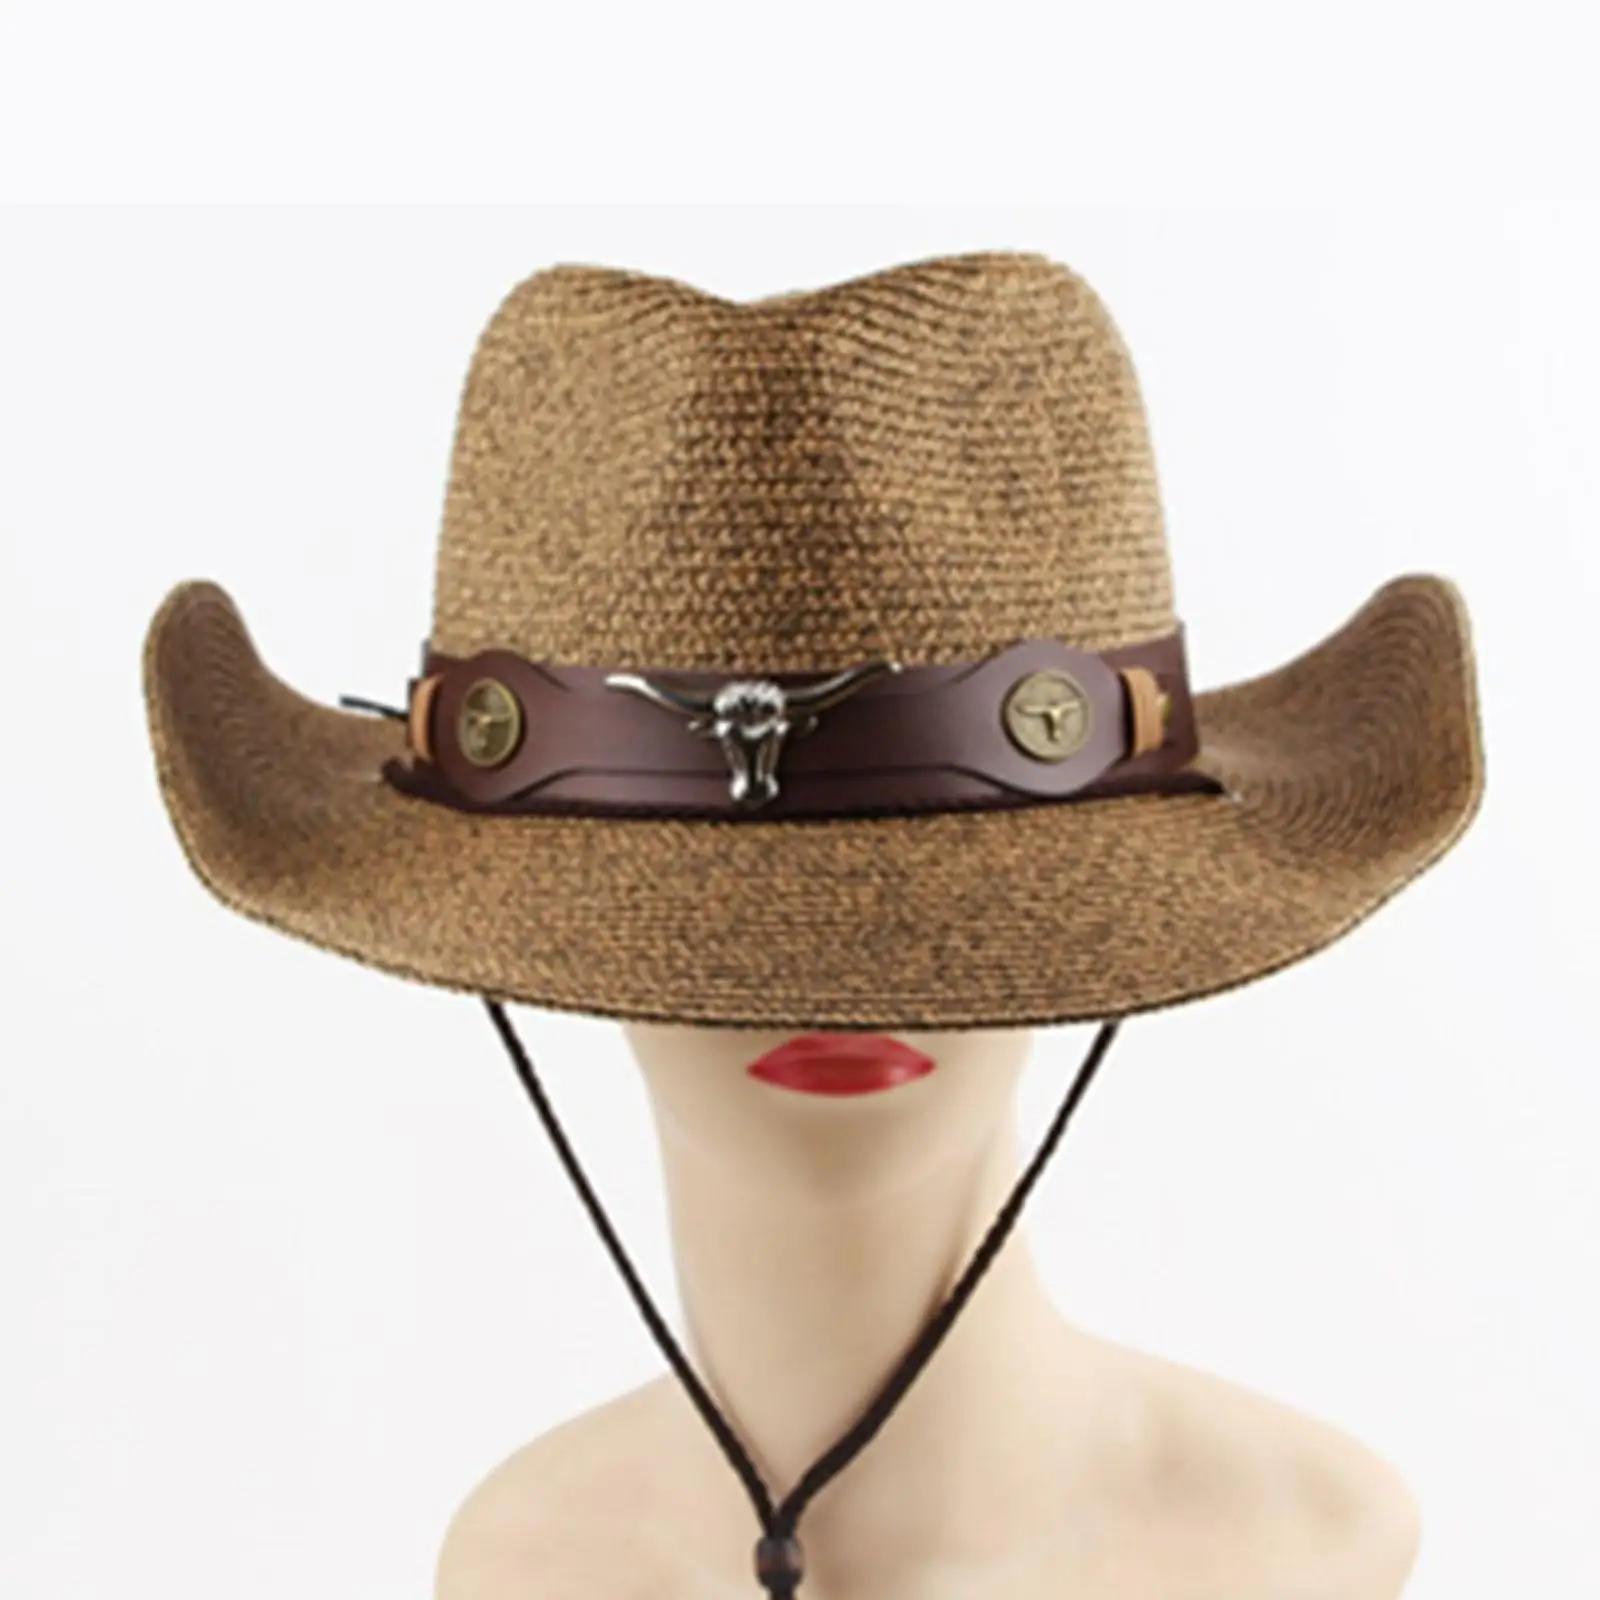 Straw Cowboy Hat Shapeable Sun Hat Cowboy Hats for Outdoor Summer Party Sun Protection